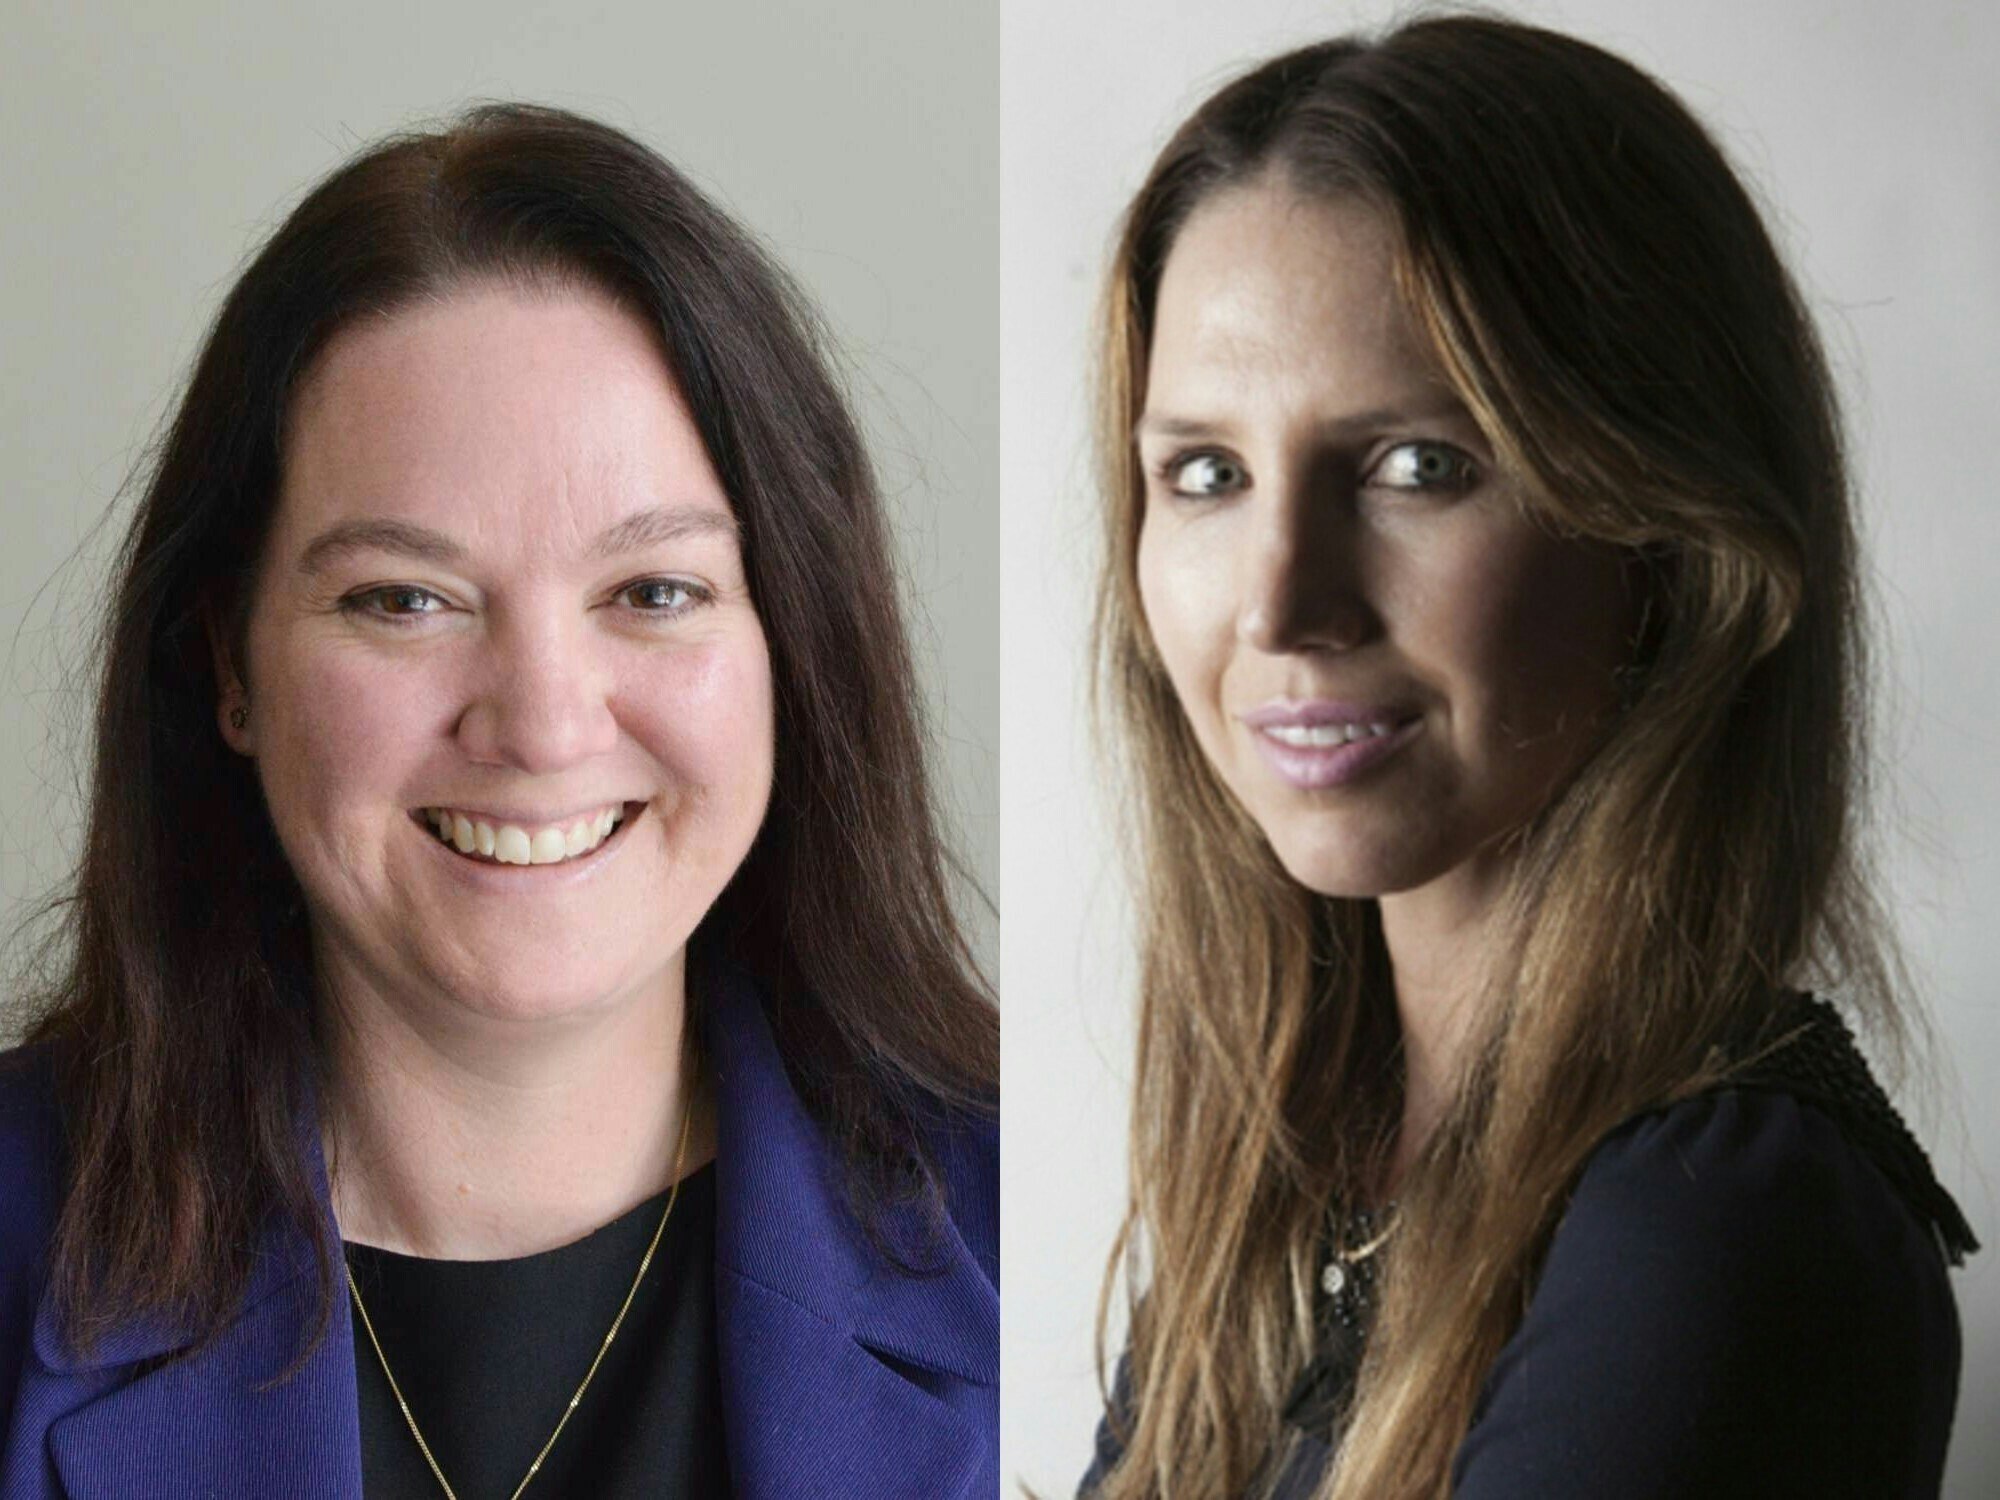 <p>CEO of DPS Publishing Michelle Beech, left, and CarePage founder and CEO Lauren Todorovic.</p>
